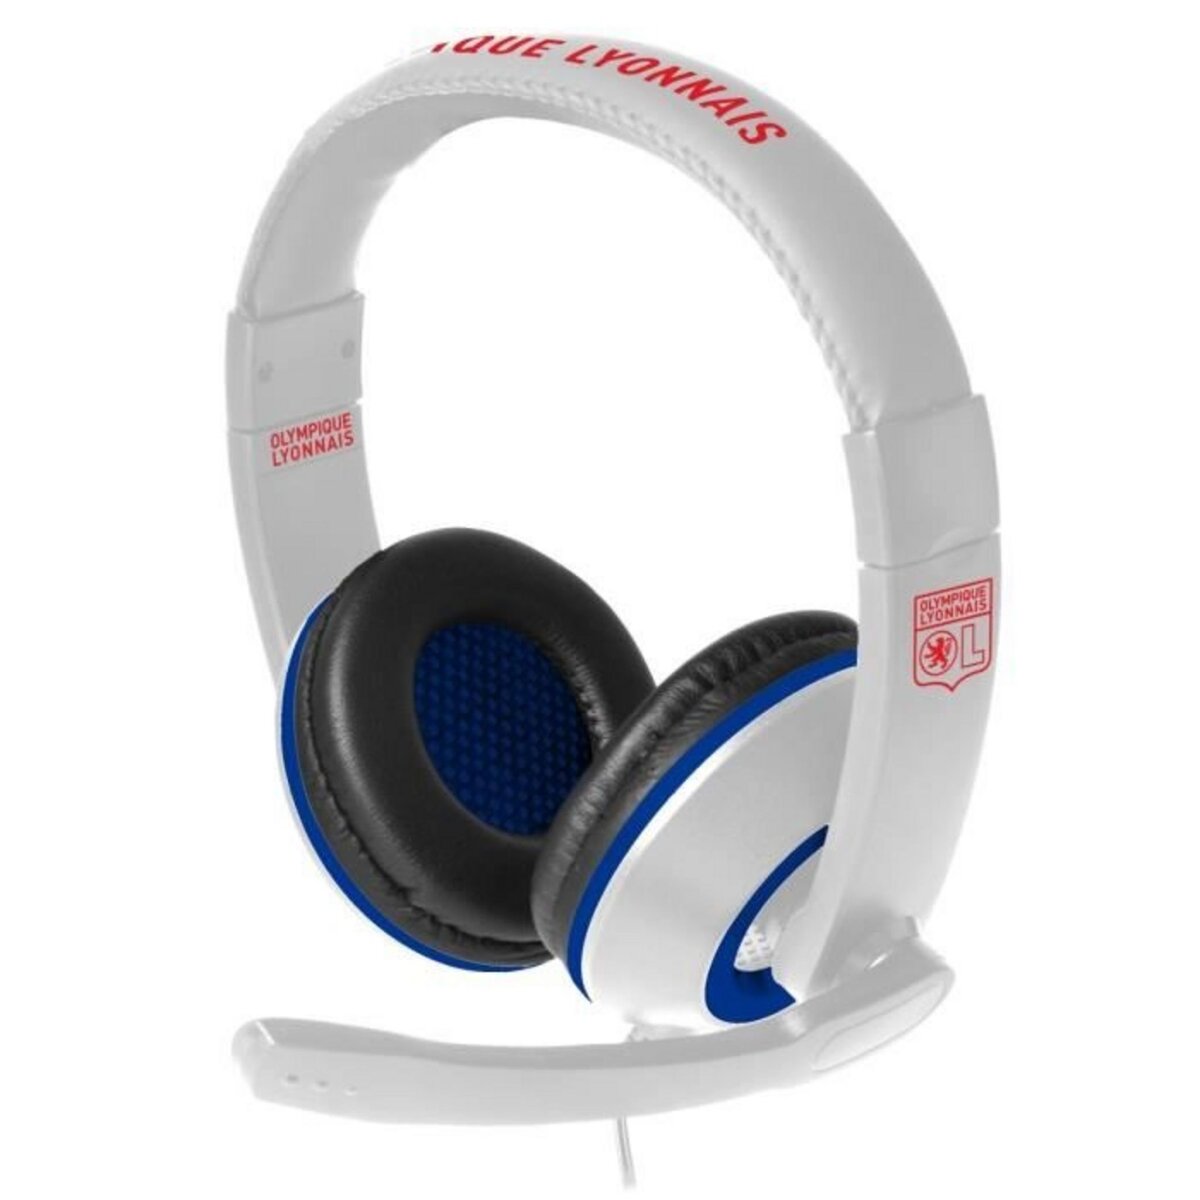 SUBSONIC Casque gaming pour PS4 et Xbox One - OL